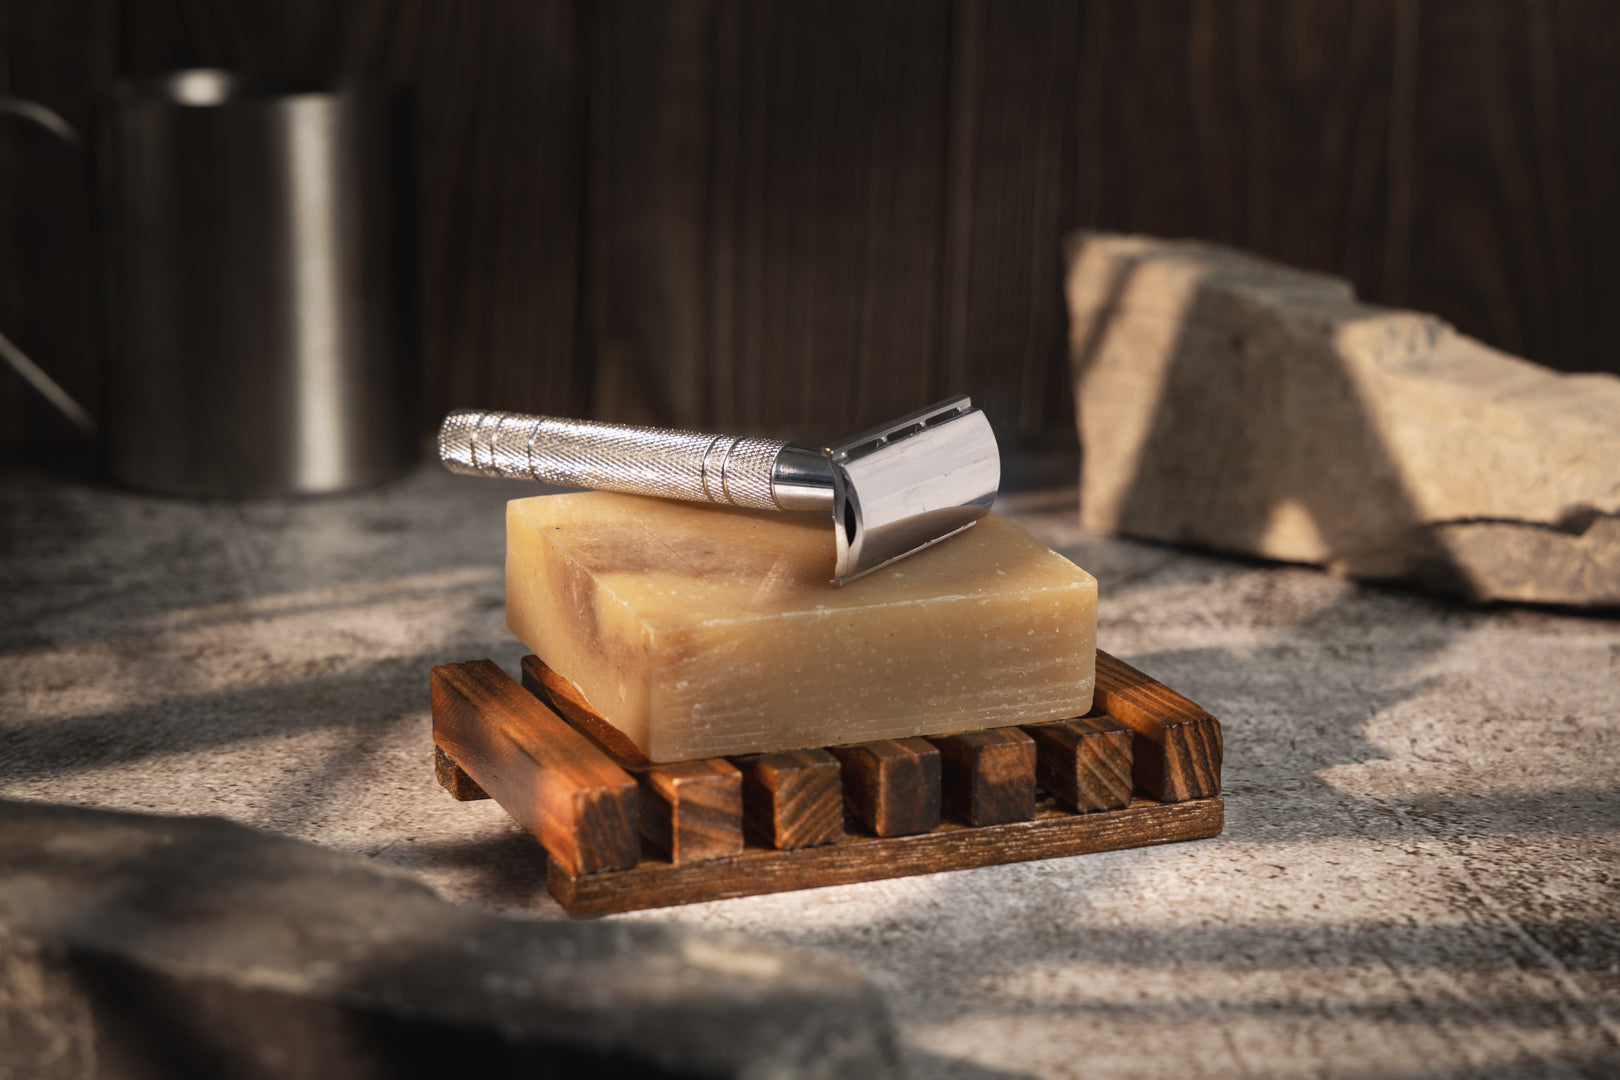 This image shows a metal reusable safety razor for body and face shaving as a plastic free alternative to disposable razors. It comes with replacement blades. It is designed for eco friendly zero waste plastic free more sustainable shaving. In the image the metal reusable safety razor is on top of a shave soap bar and soap rack